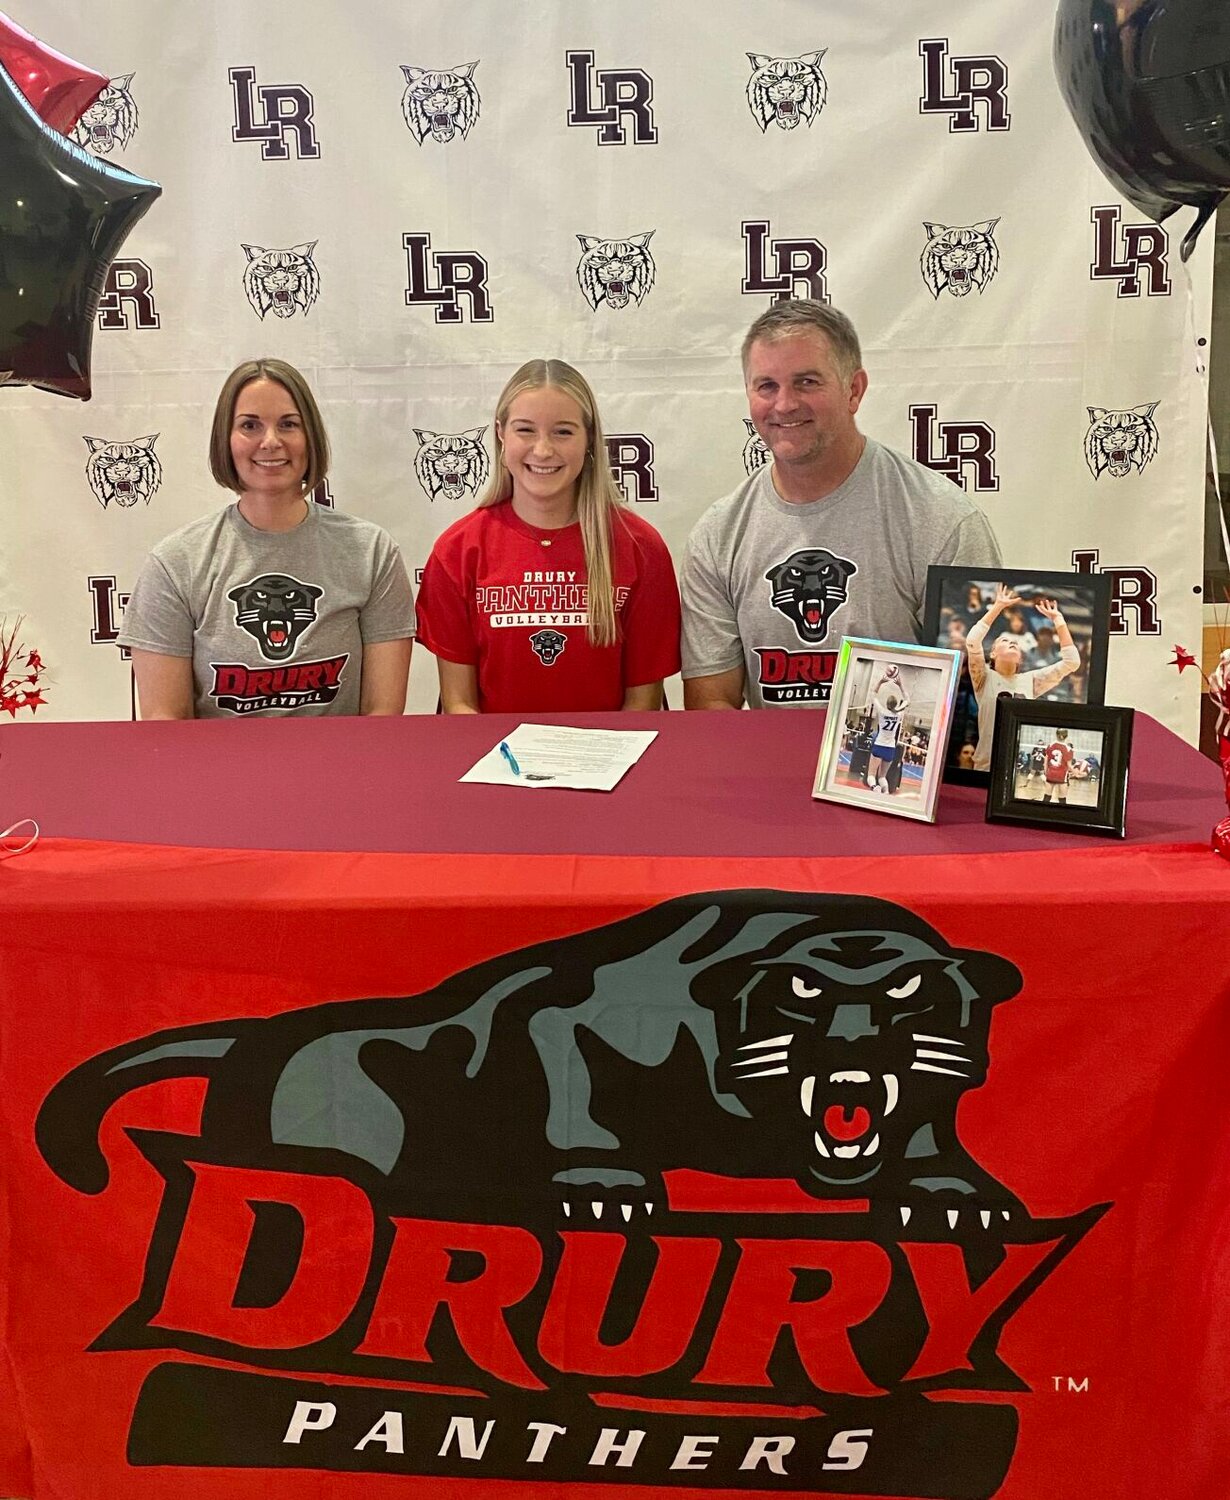 After signing her letter to play volleyball at Drury, Lauren Tyler is smiling with pride alongside her family.